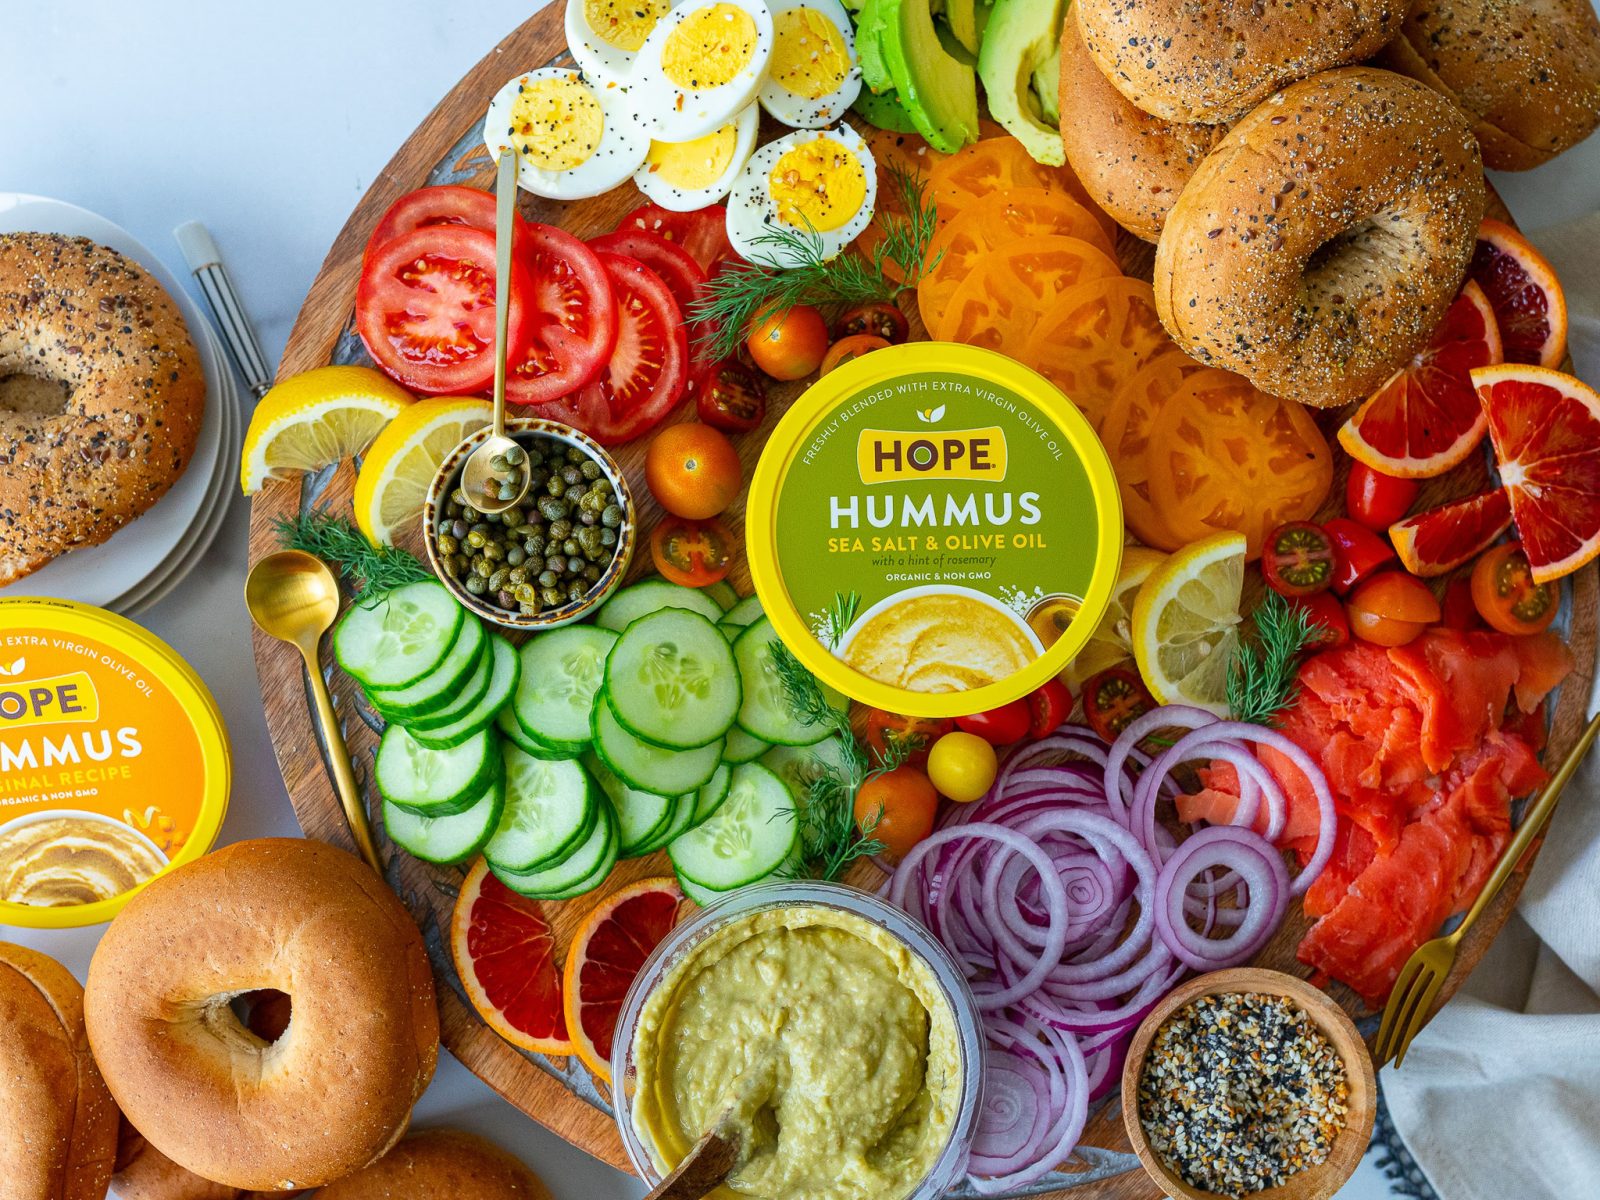 HOPE Hummus Makes Entertaining Easy & Delicious- Buy One, Get One FREE (Perfect For A Tasty Bagel Board!)